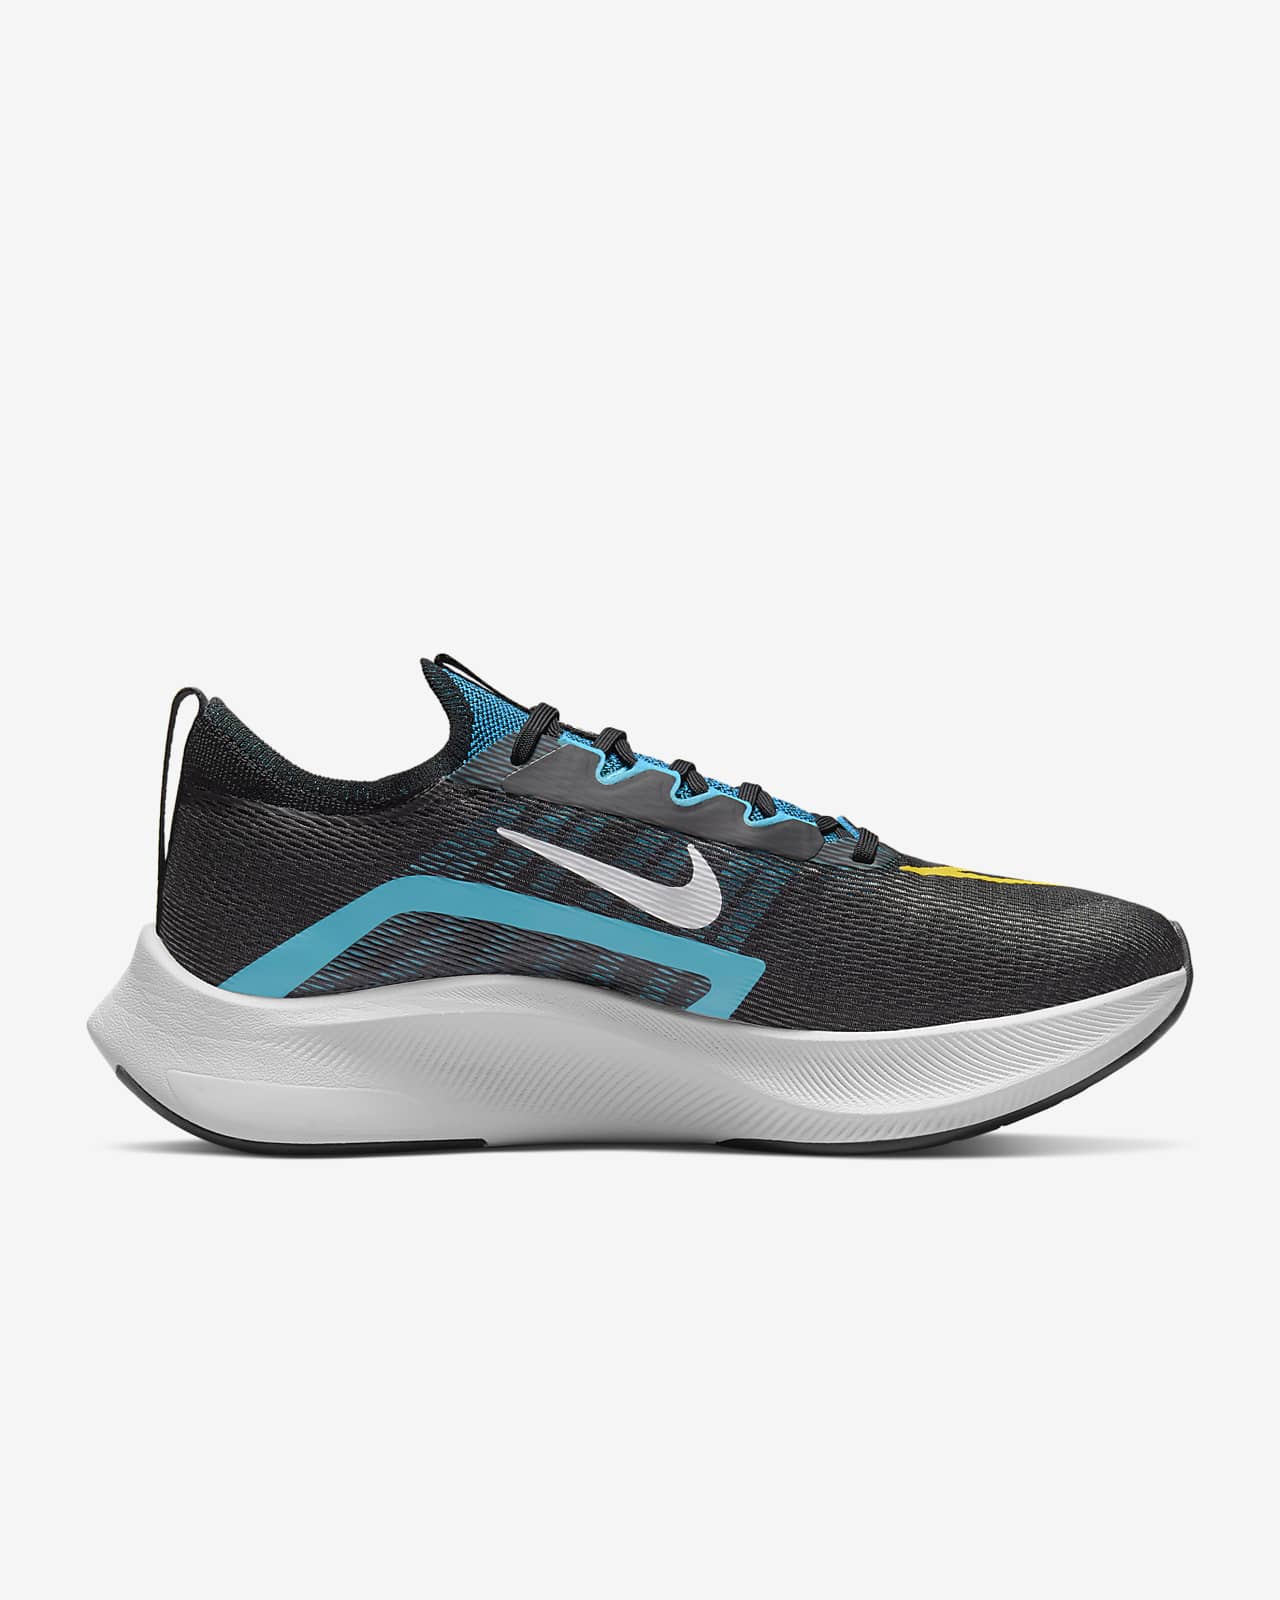 Nike Men's Zoom Fly Running Shoe Review Cheap Order, Save 45% | idiomas ...